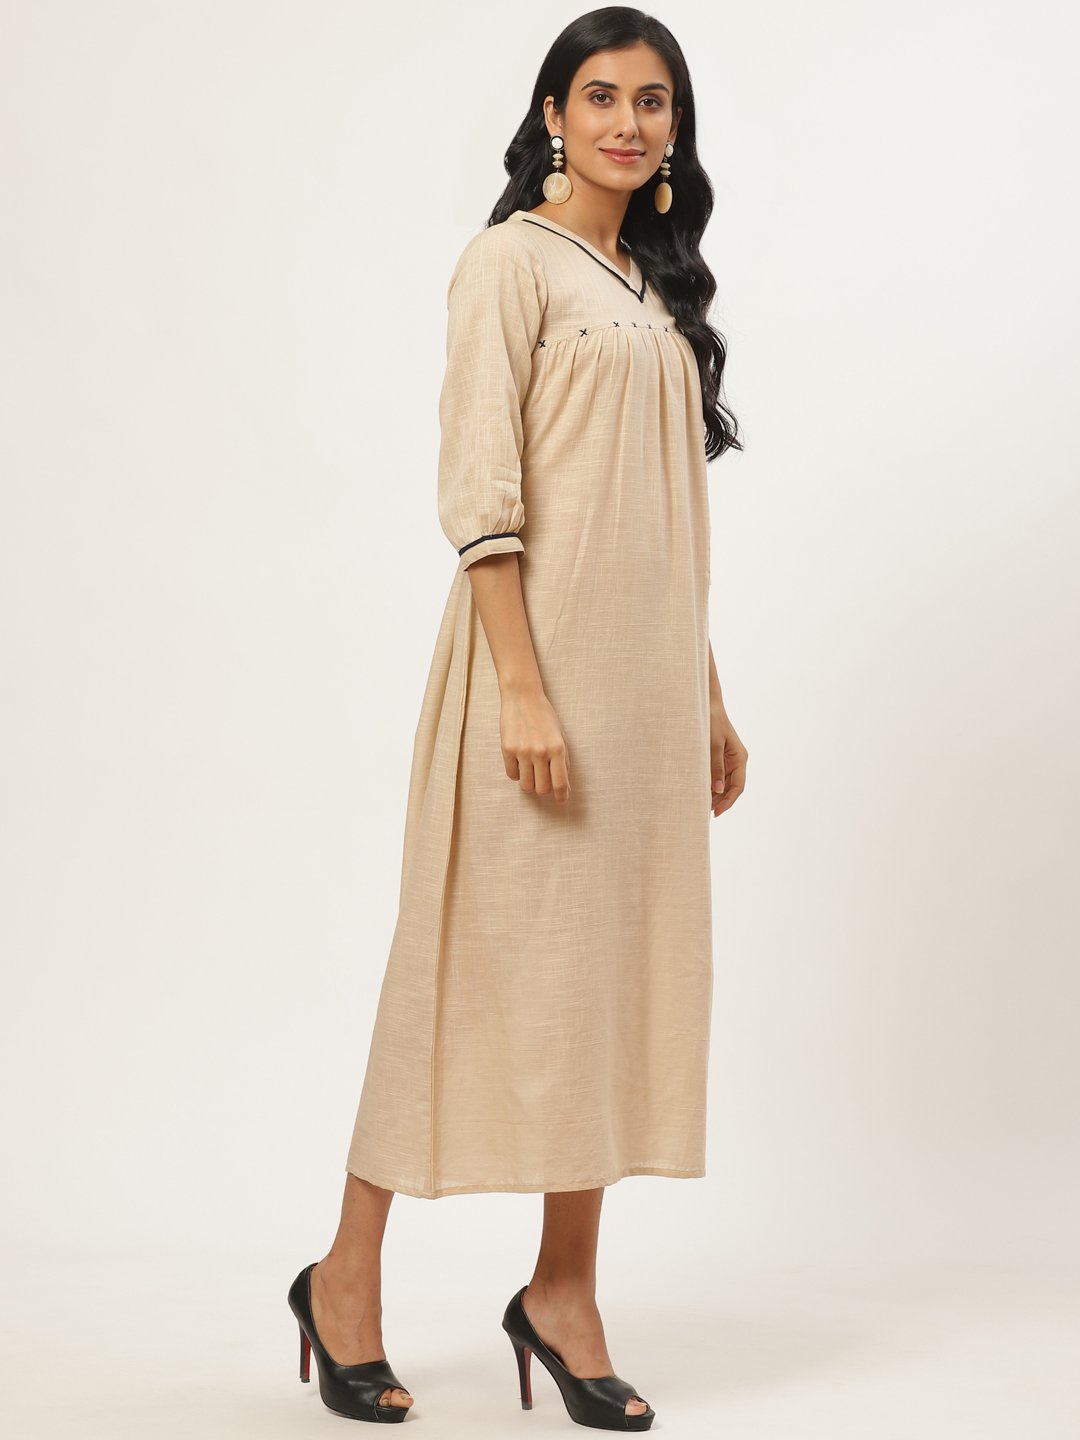 Women's Beige Solid Solid V-Neck Cotton A-Line Dress - Nayo Clothing